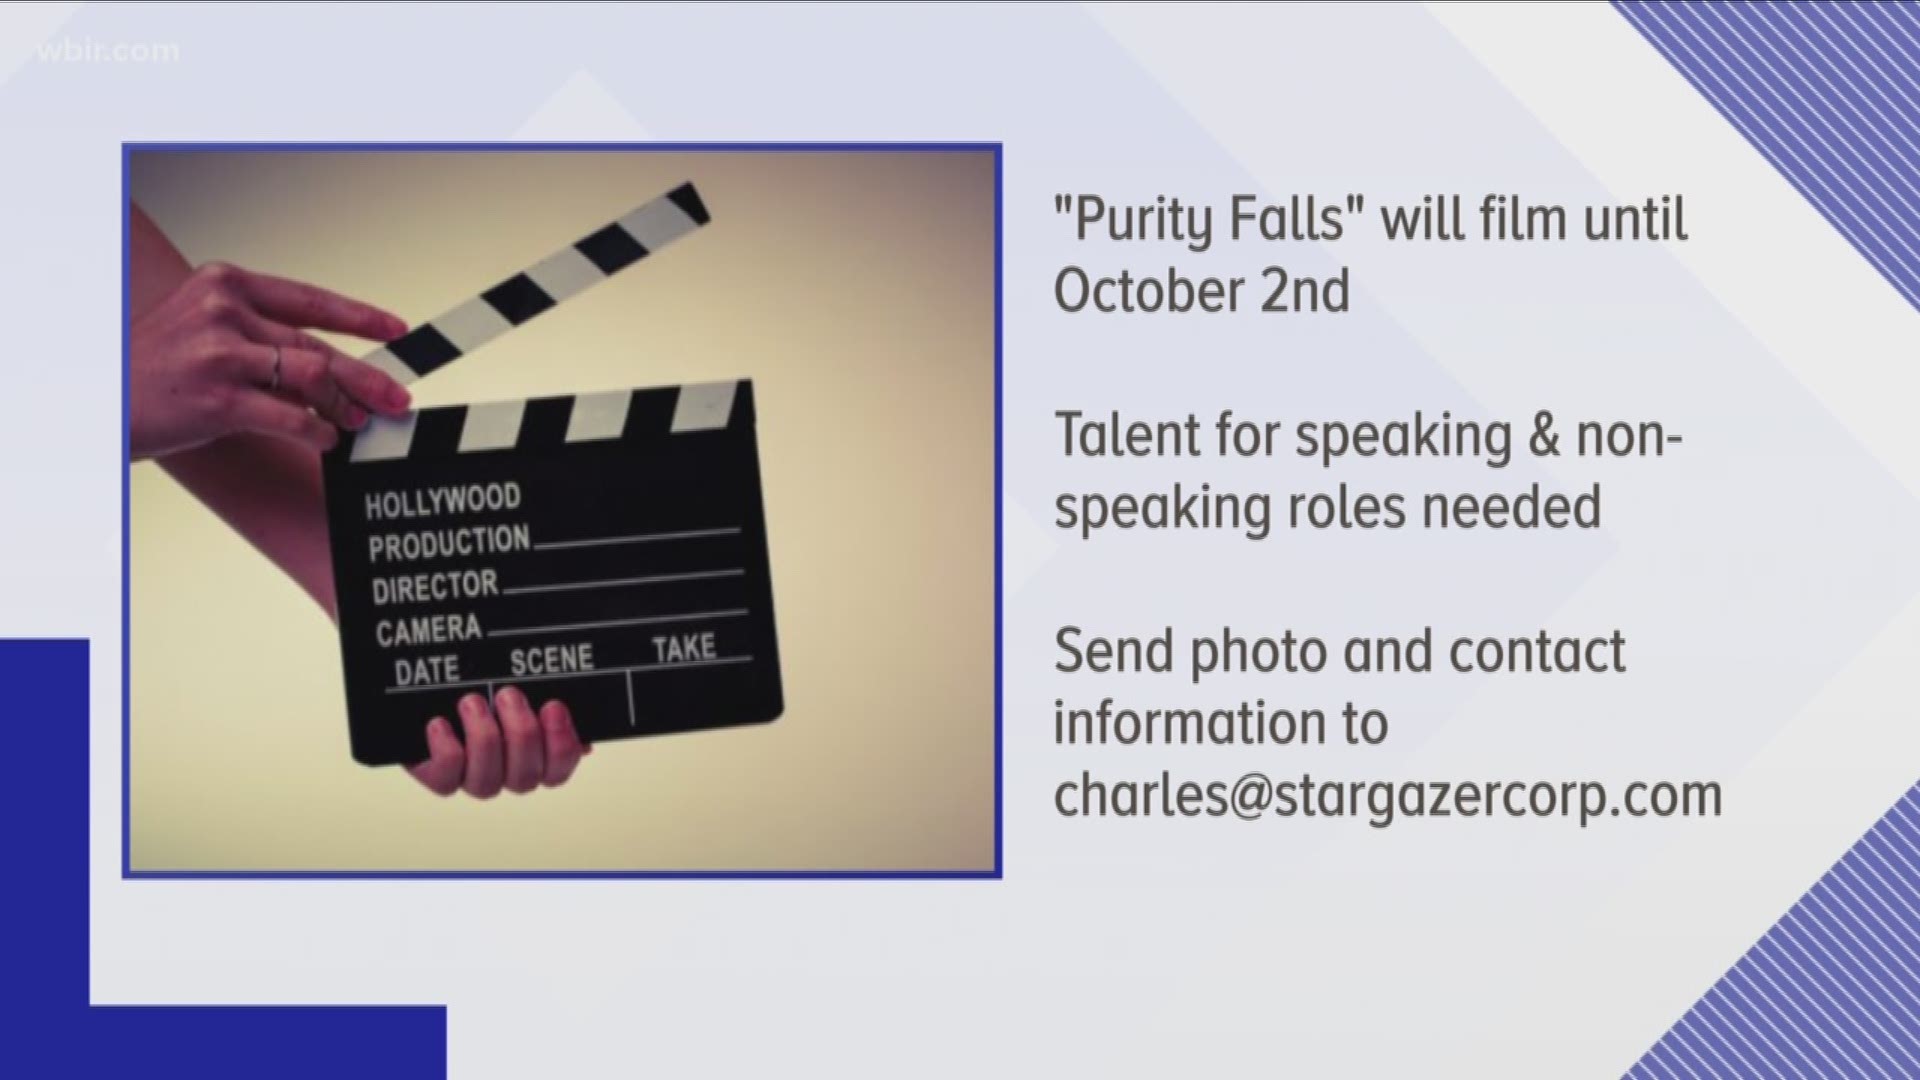 Stargazer Films is casting background actors for a movie called 'Purity Falls.' The movie will be shot in the Knoxville area starting September 17 through October 2, according to the production company.